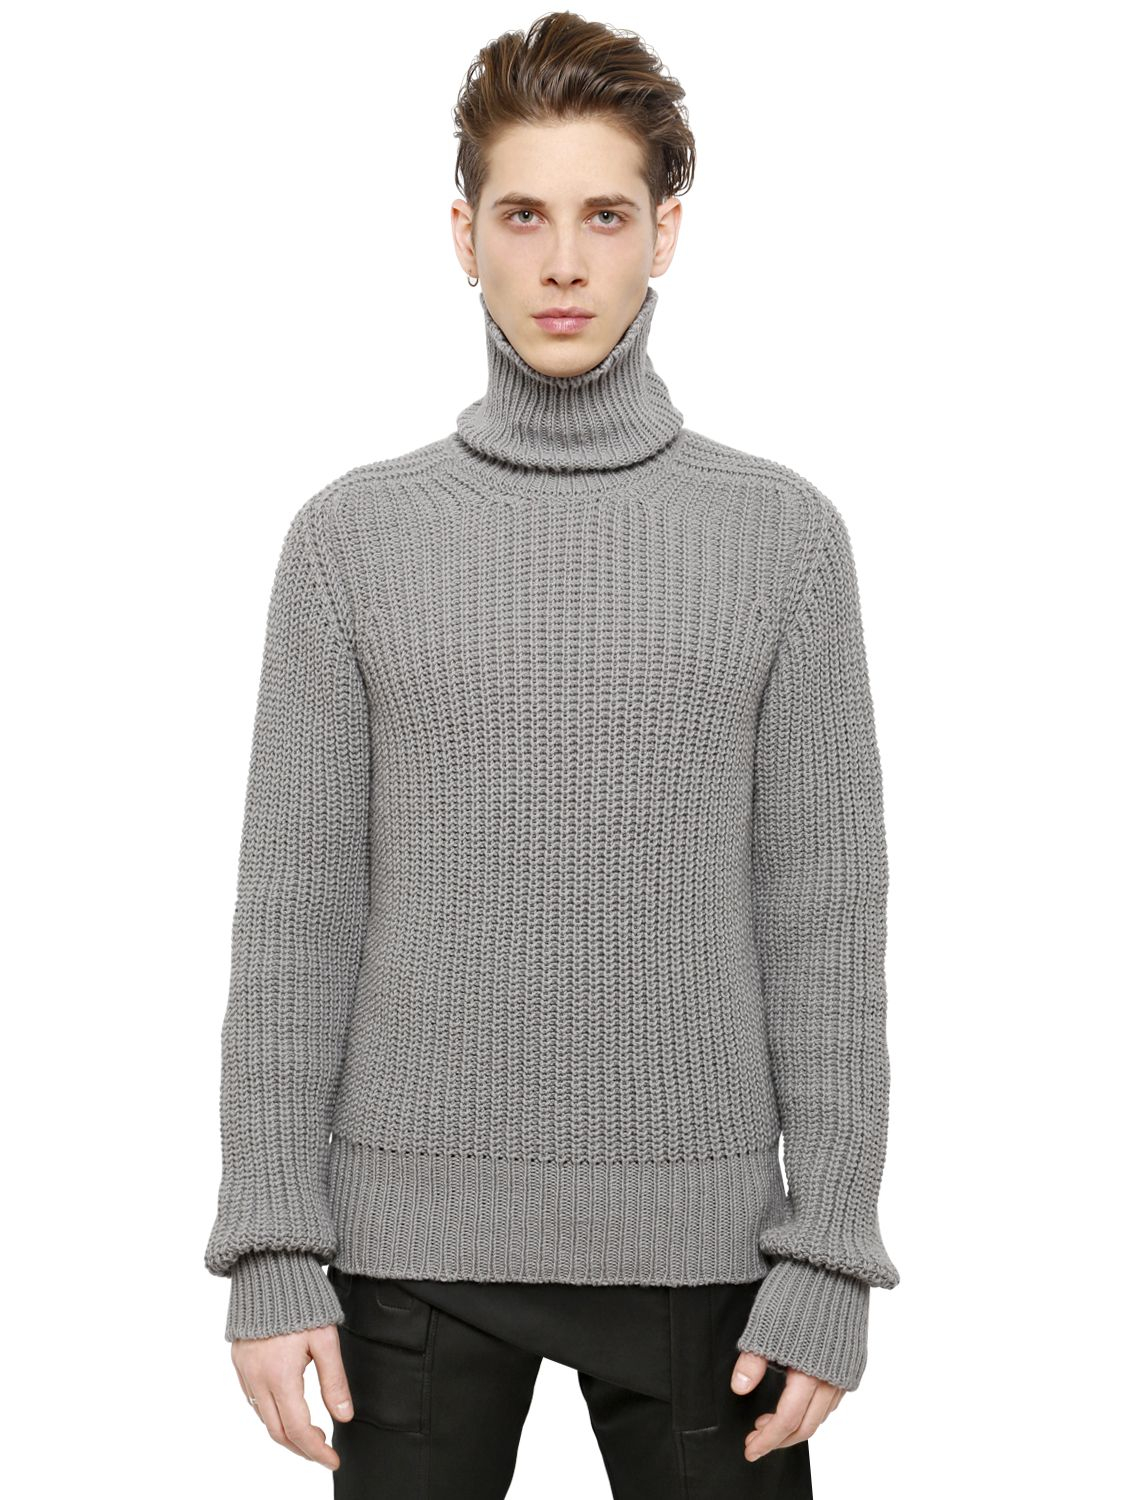 Lyst - Rick Owens Turtleneck Chunky Wool Sweater in Gray for Men